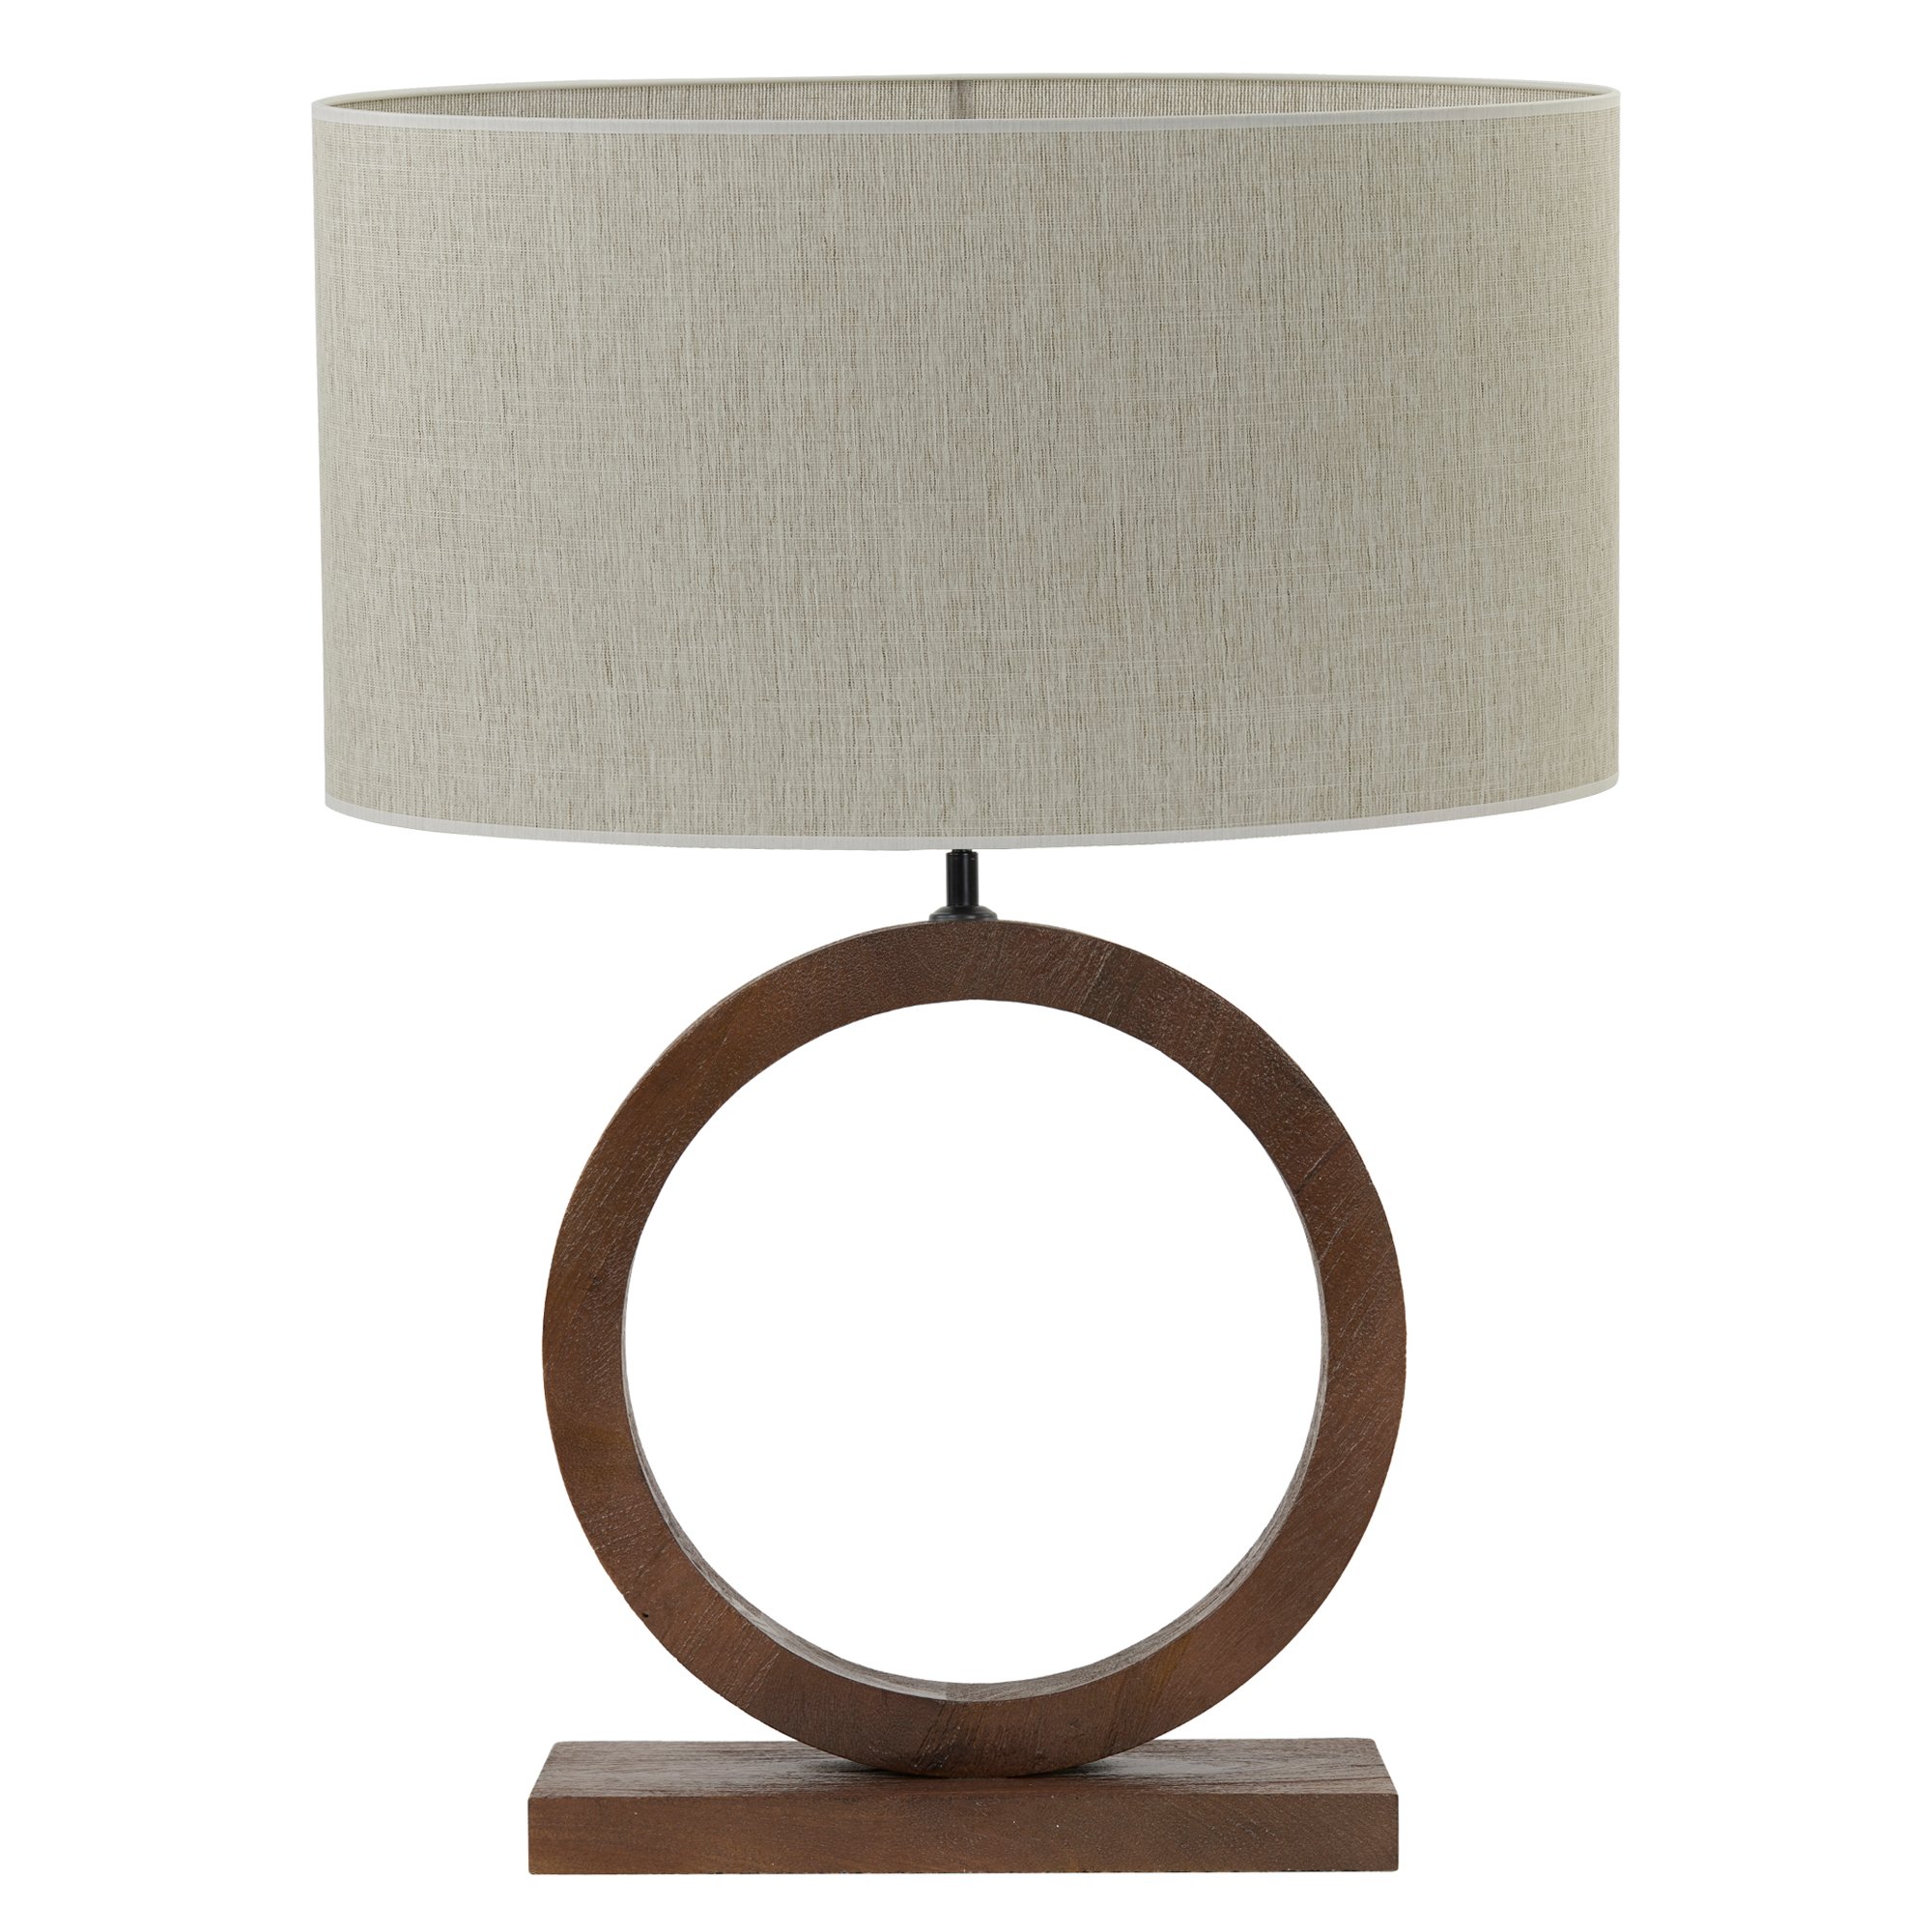 Round Wood Table Lamp, Brown | Barker & Stonehouse